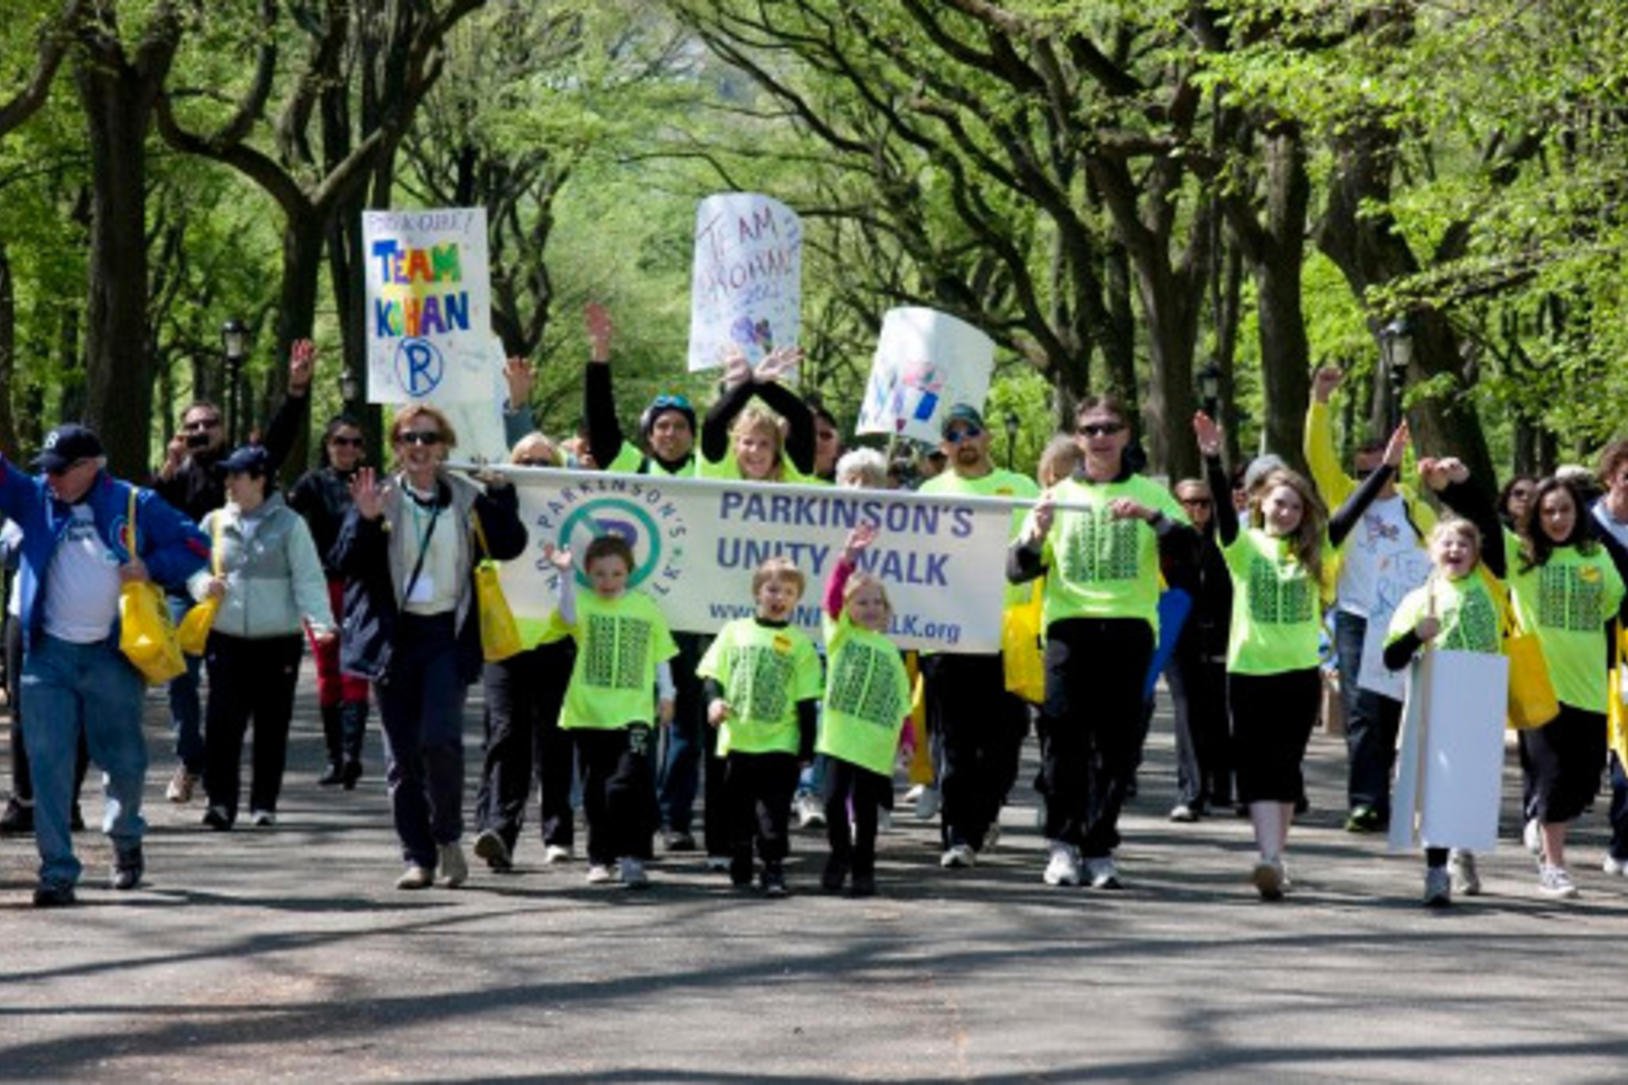 Make Every Step Count at the Parkinsons Unity Walk on April 27 in New ...